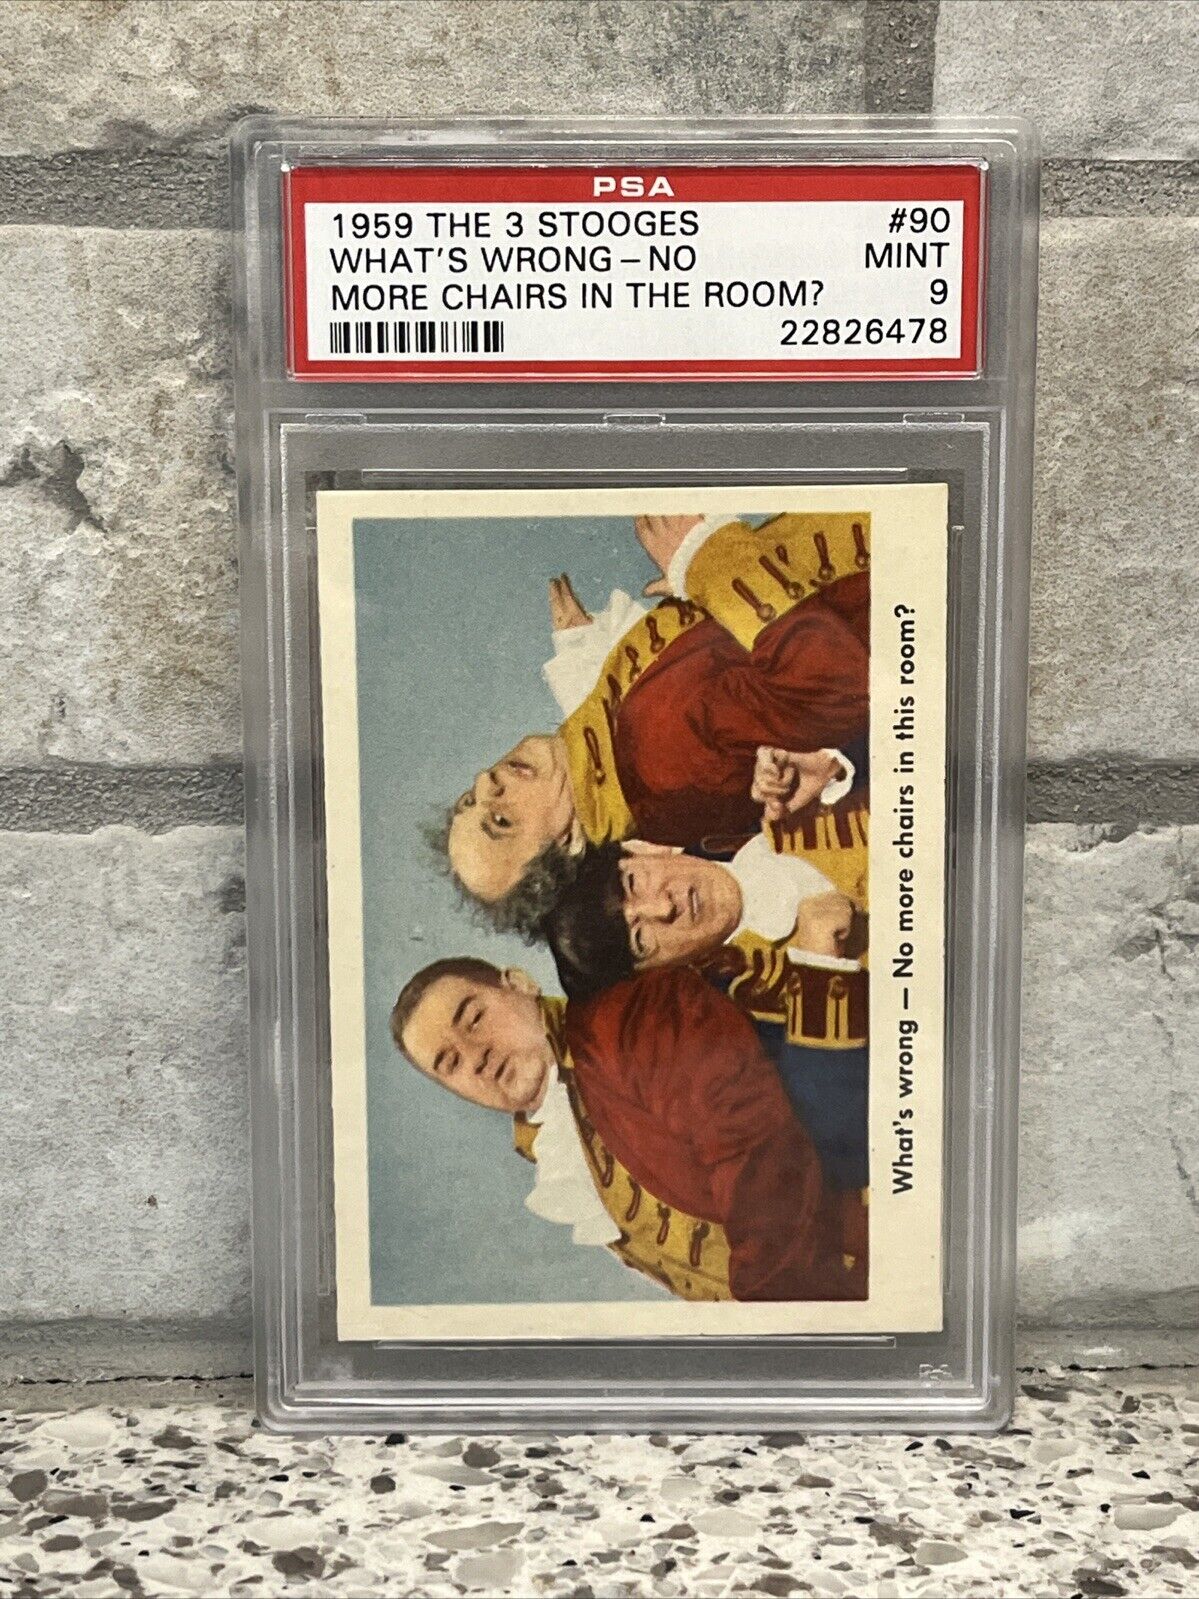 1959 Fleer The 3 Three Stooges #90 What's Wrong - No Chairs... PSA 9 MINT